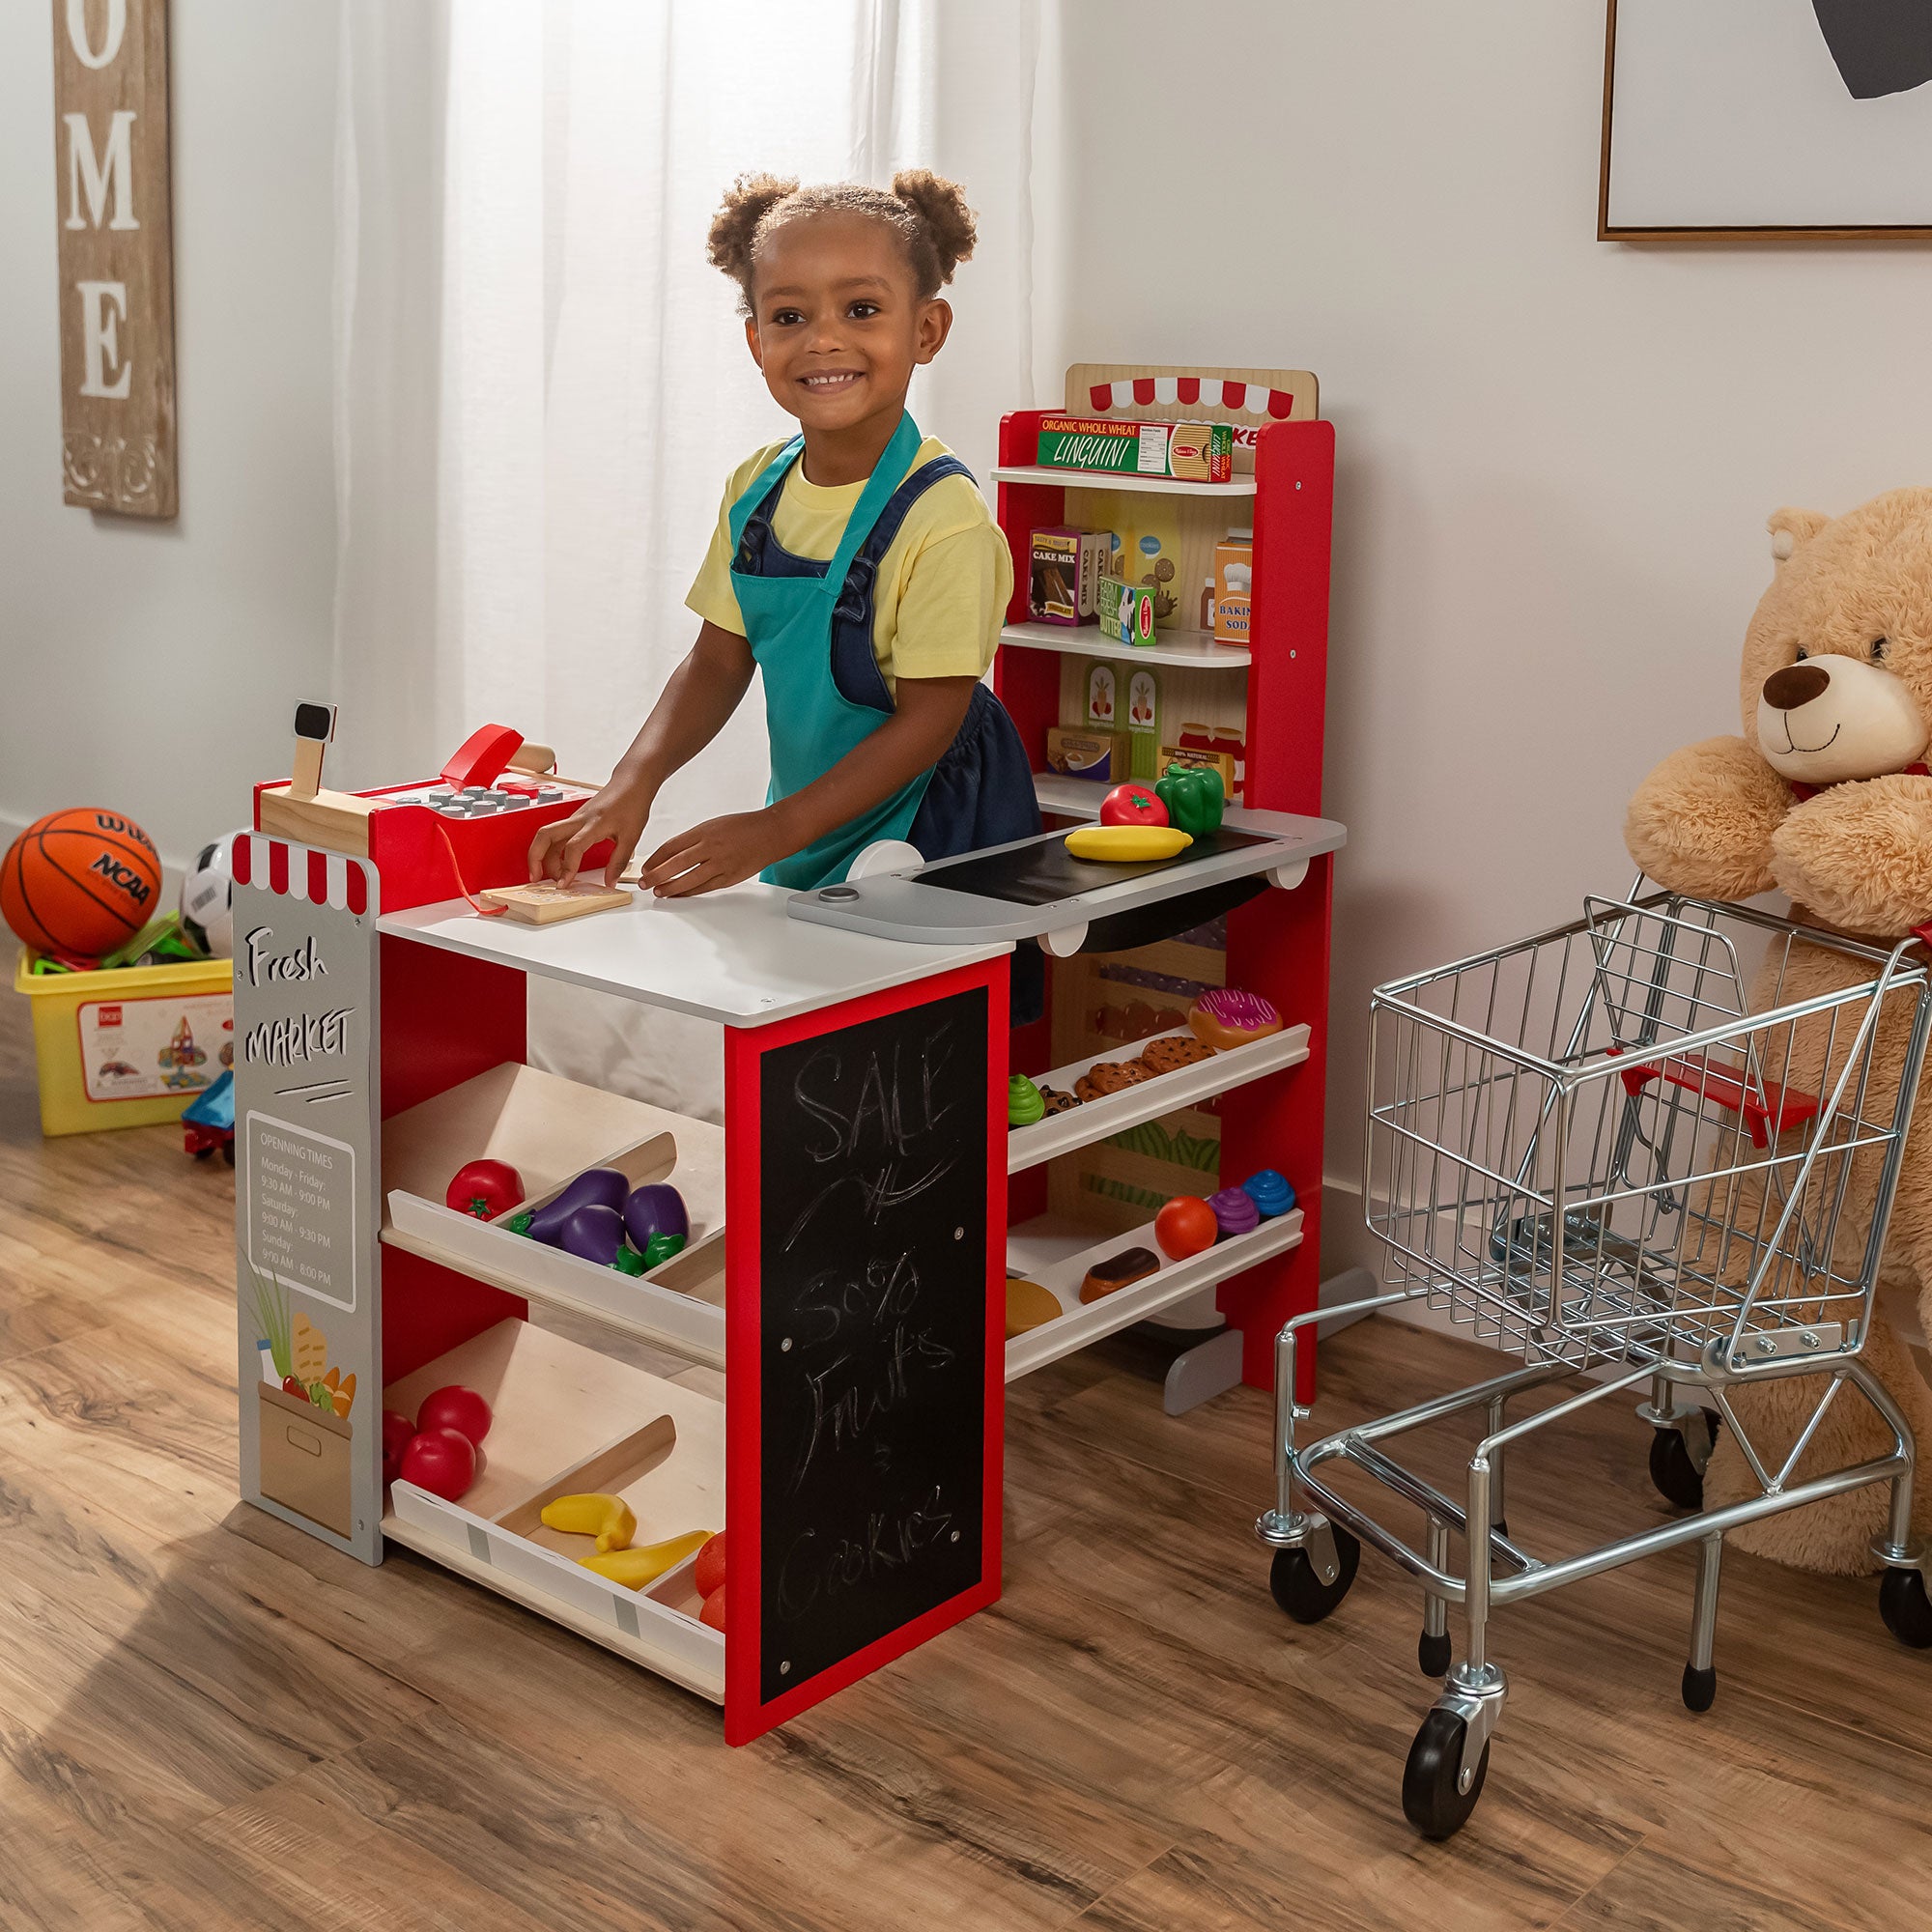 Best choice products Collection header - Pretend Play